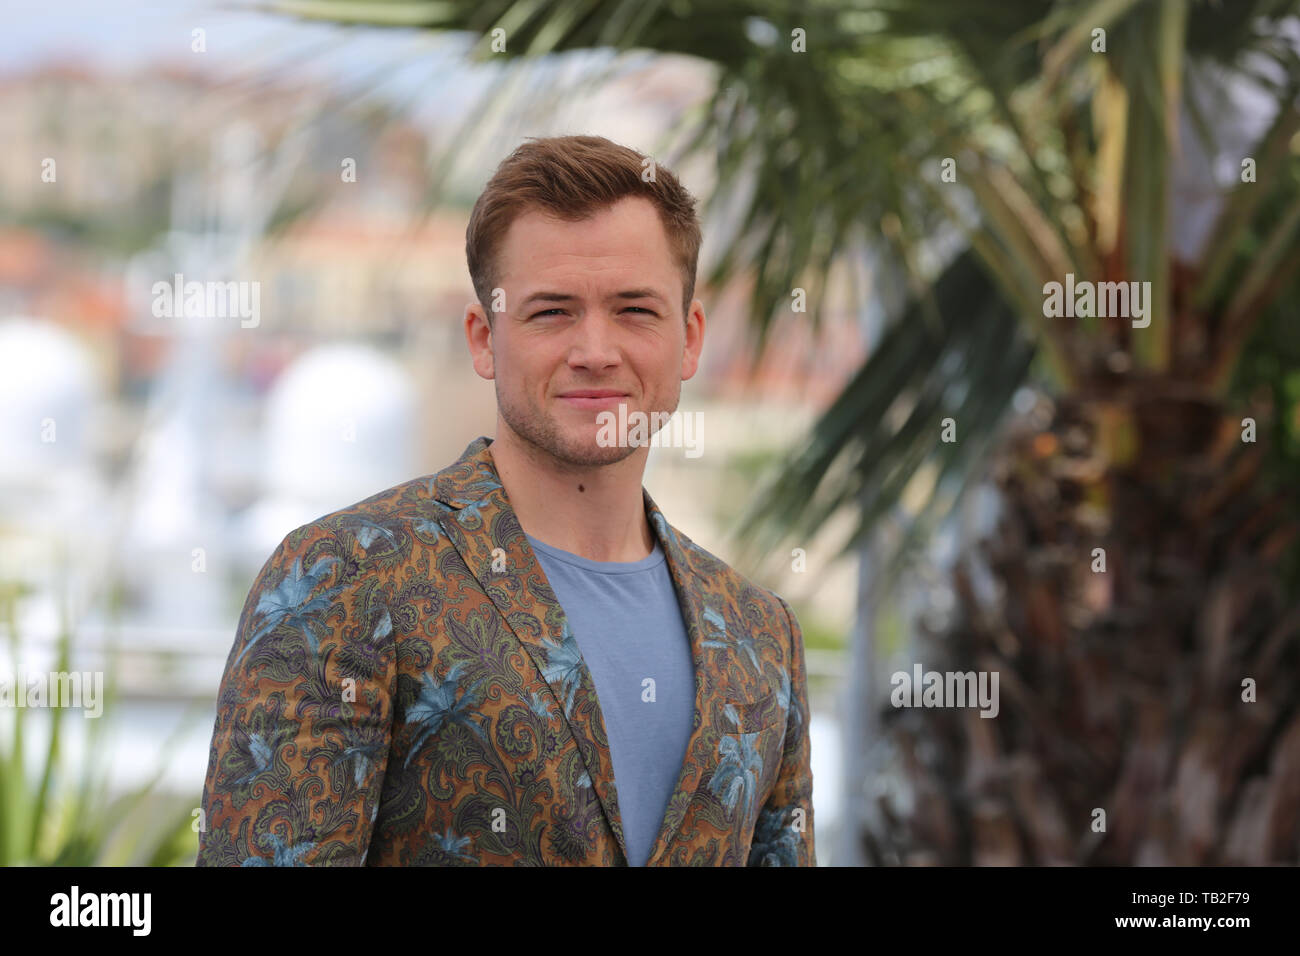 CANNES, FRANCE - MAY 16: Taron Egerton attends the 'Rocketman' photocall during the 72nd Cannes Film Festival (Credit: Mickael Chavet/Project Daybreak Stock Photo